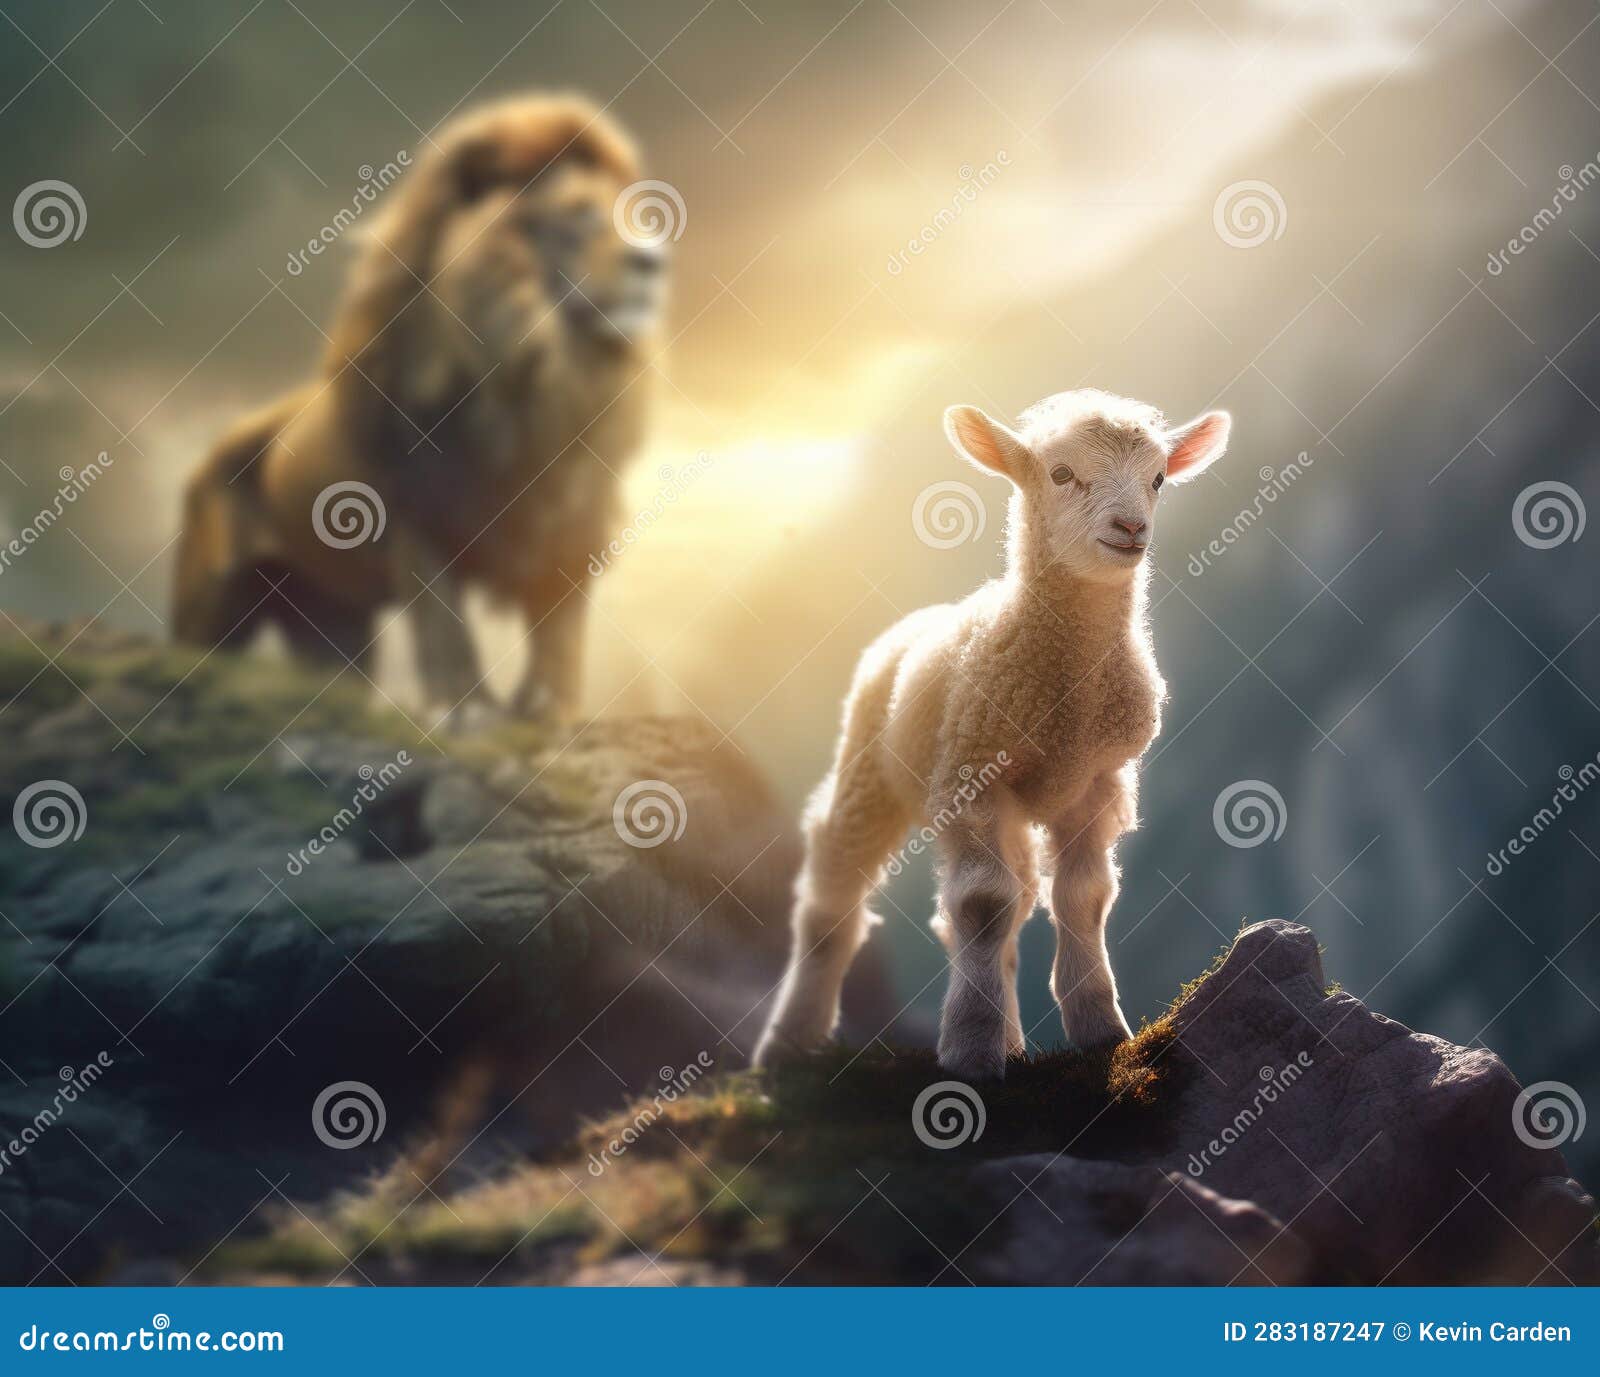 lamb is bold because lion is near